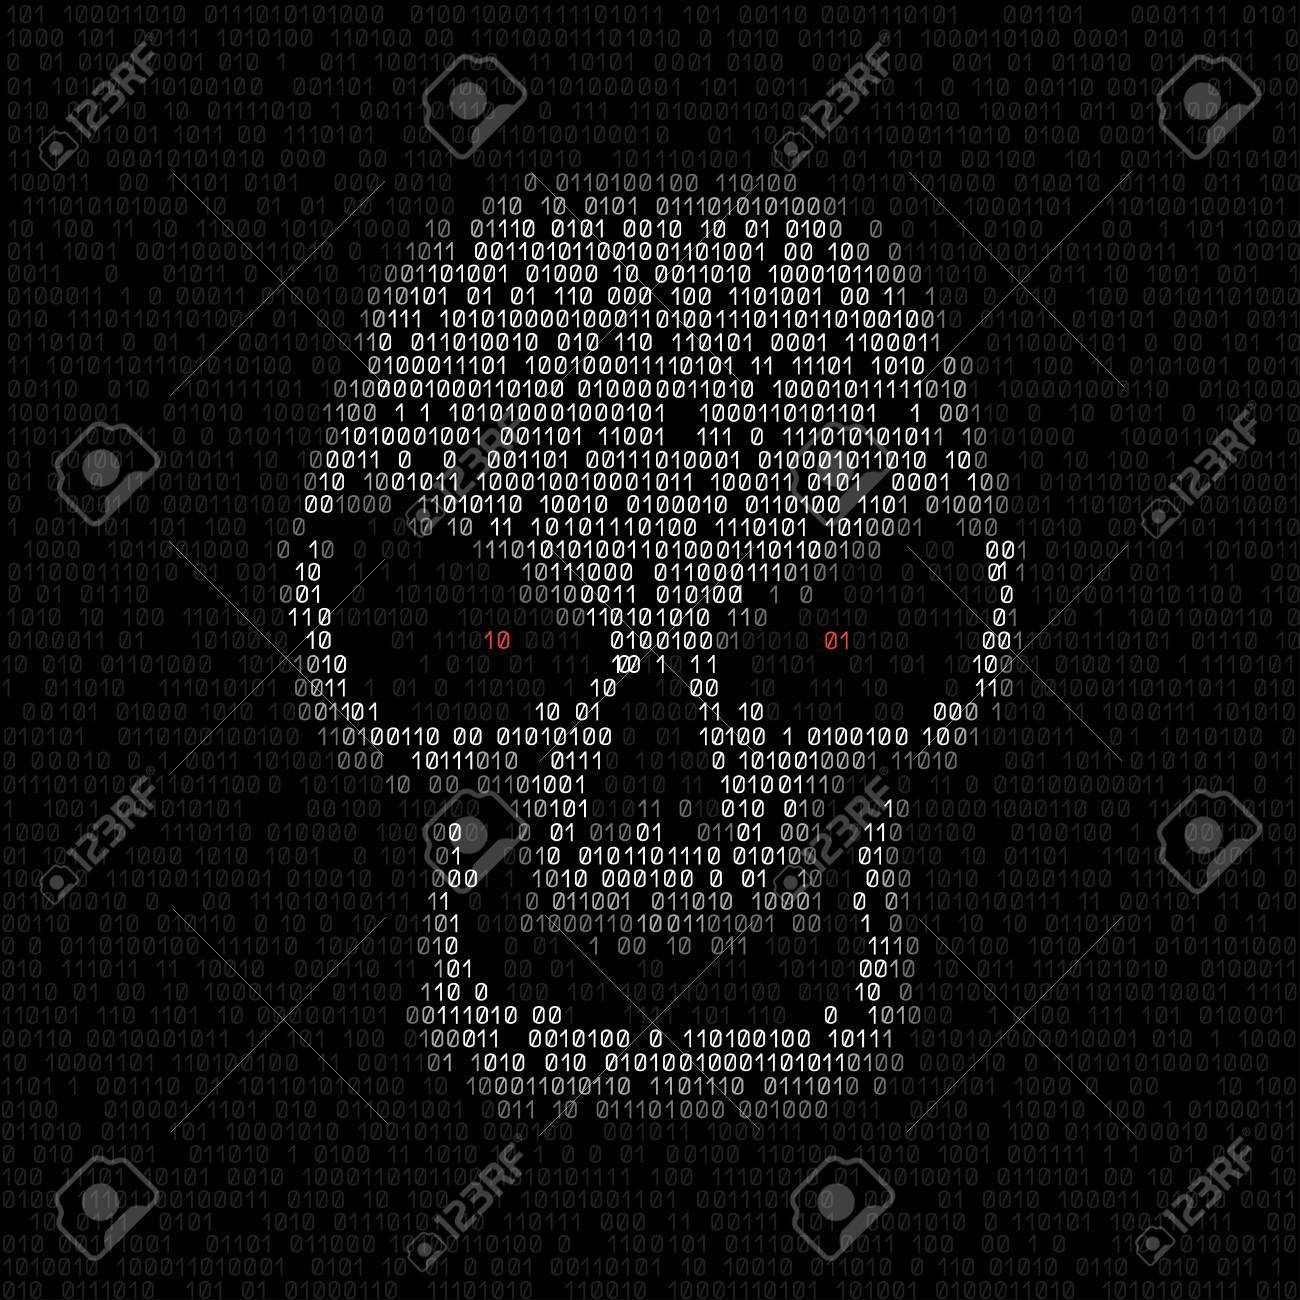 Programming Code Shows White Hacker Skull With Red Eyes On Black